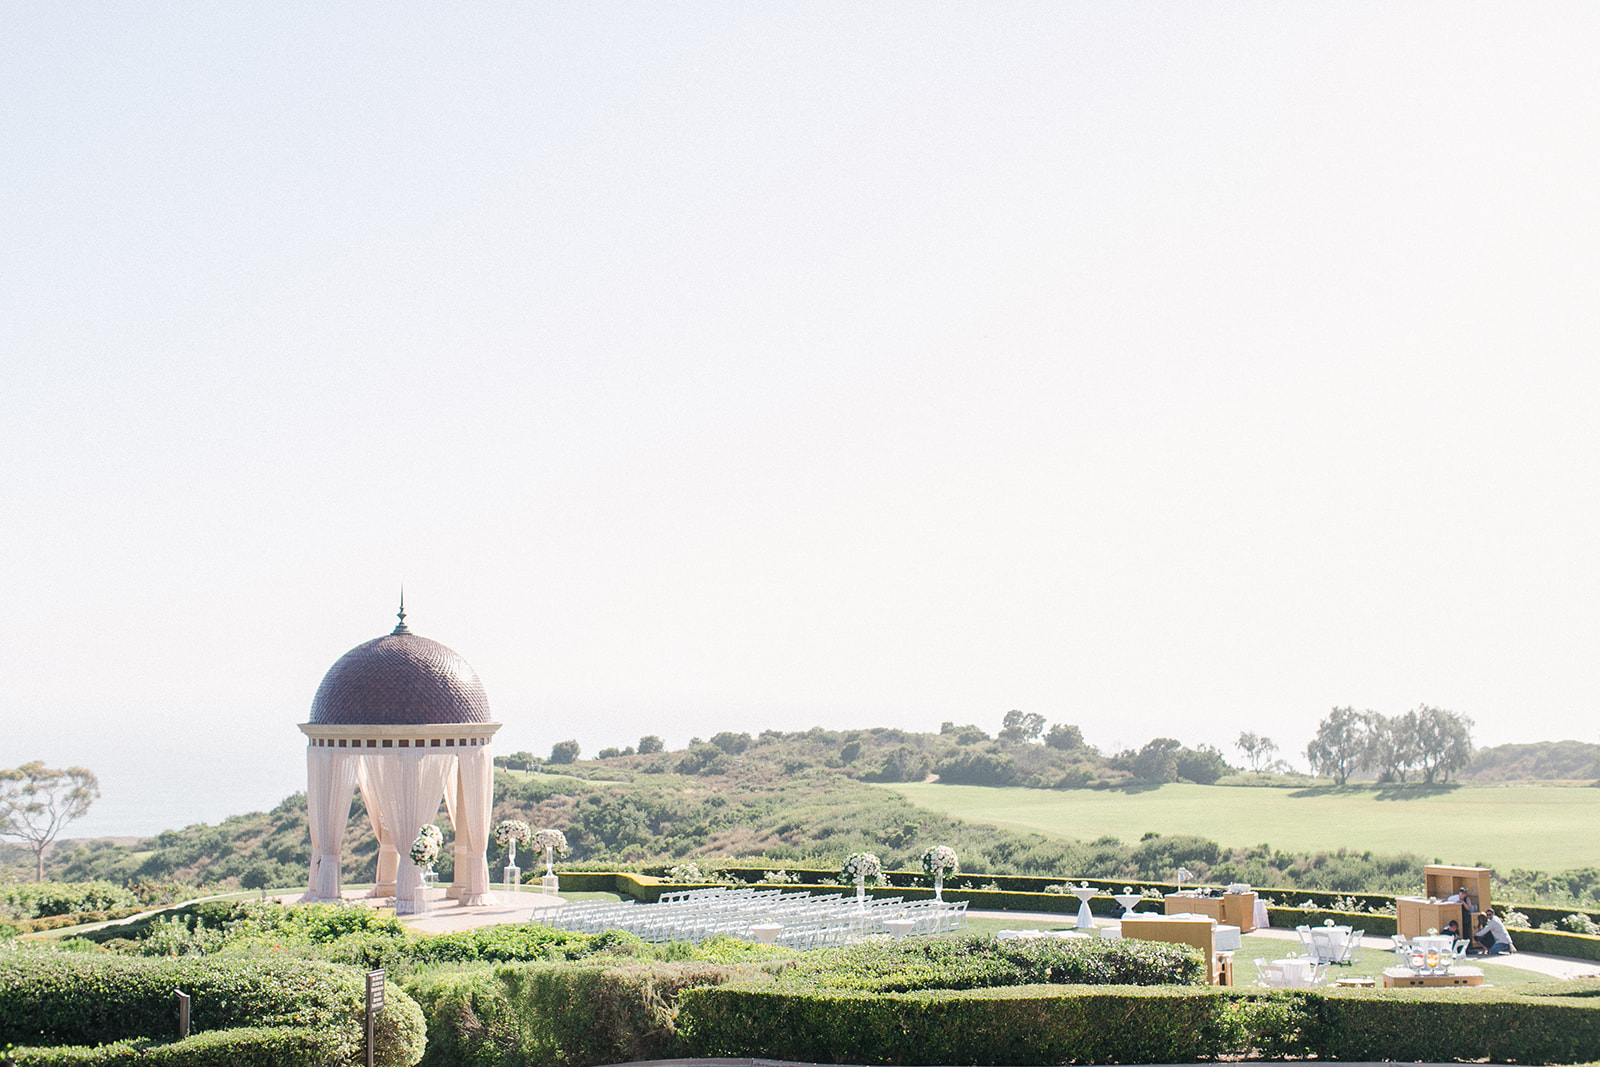 Kevin and Rose's Pelican Hill Wedding was pure magic. The gorgeous panoramic views of the Pacific Ocean coupled with the traditional garden settings offered so many enchanting backdrops to photograph this charming couple. #weddingphotography #wedding #photography
Caroline Tran - Pelican Hill Wedding Photography - Pelican Hill Wedding Photos - Pelican Hill Wedding Photographer - Wedding Photography - Wedding Photos - Pelican Hill